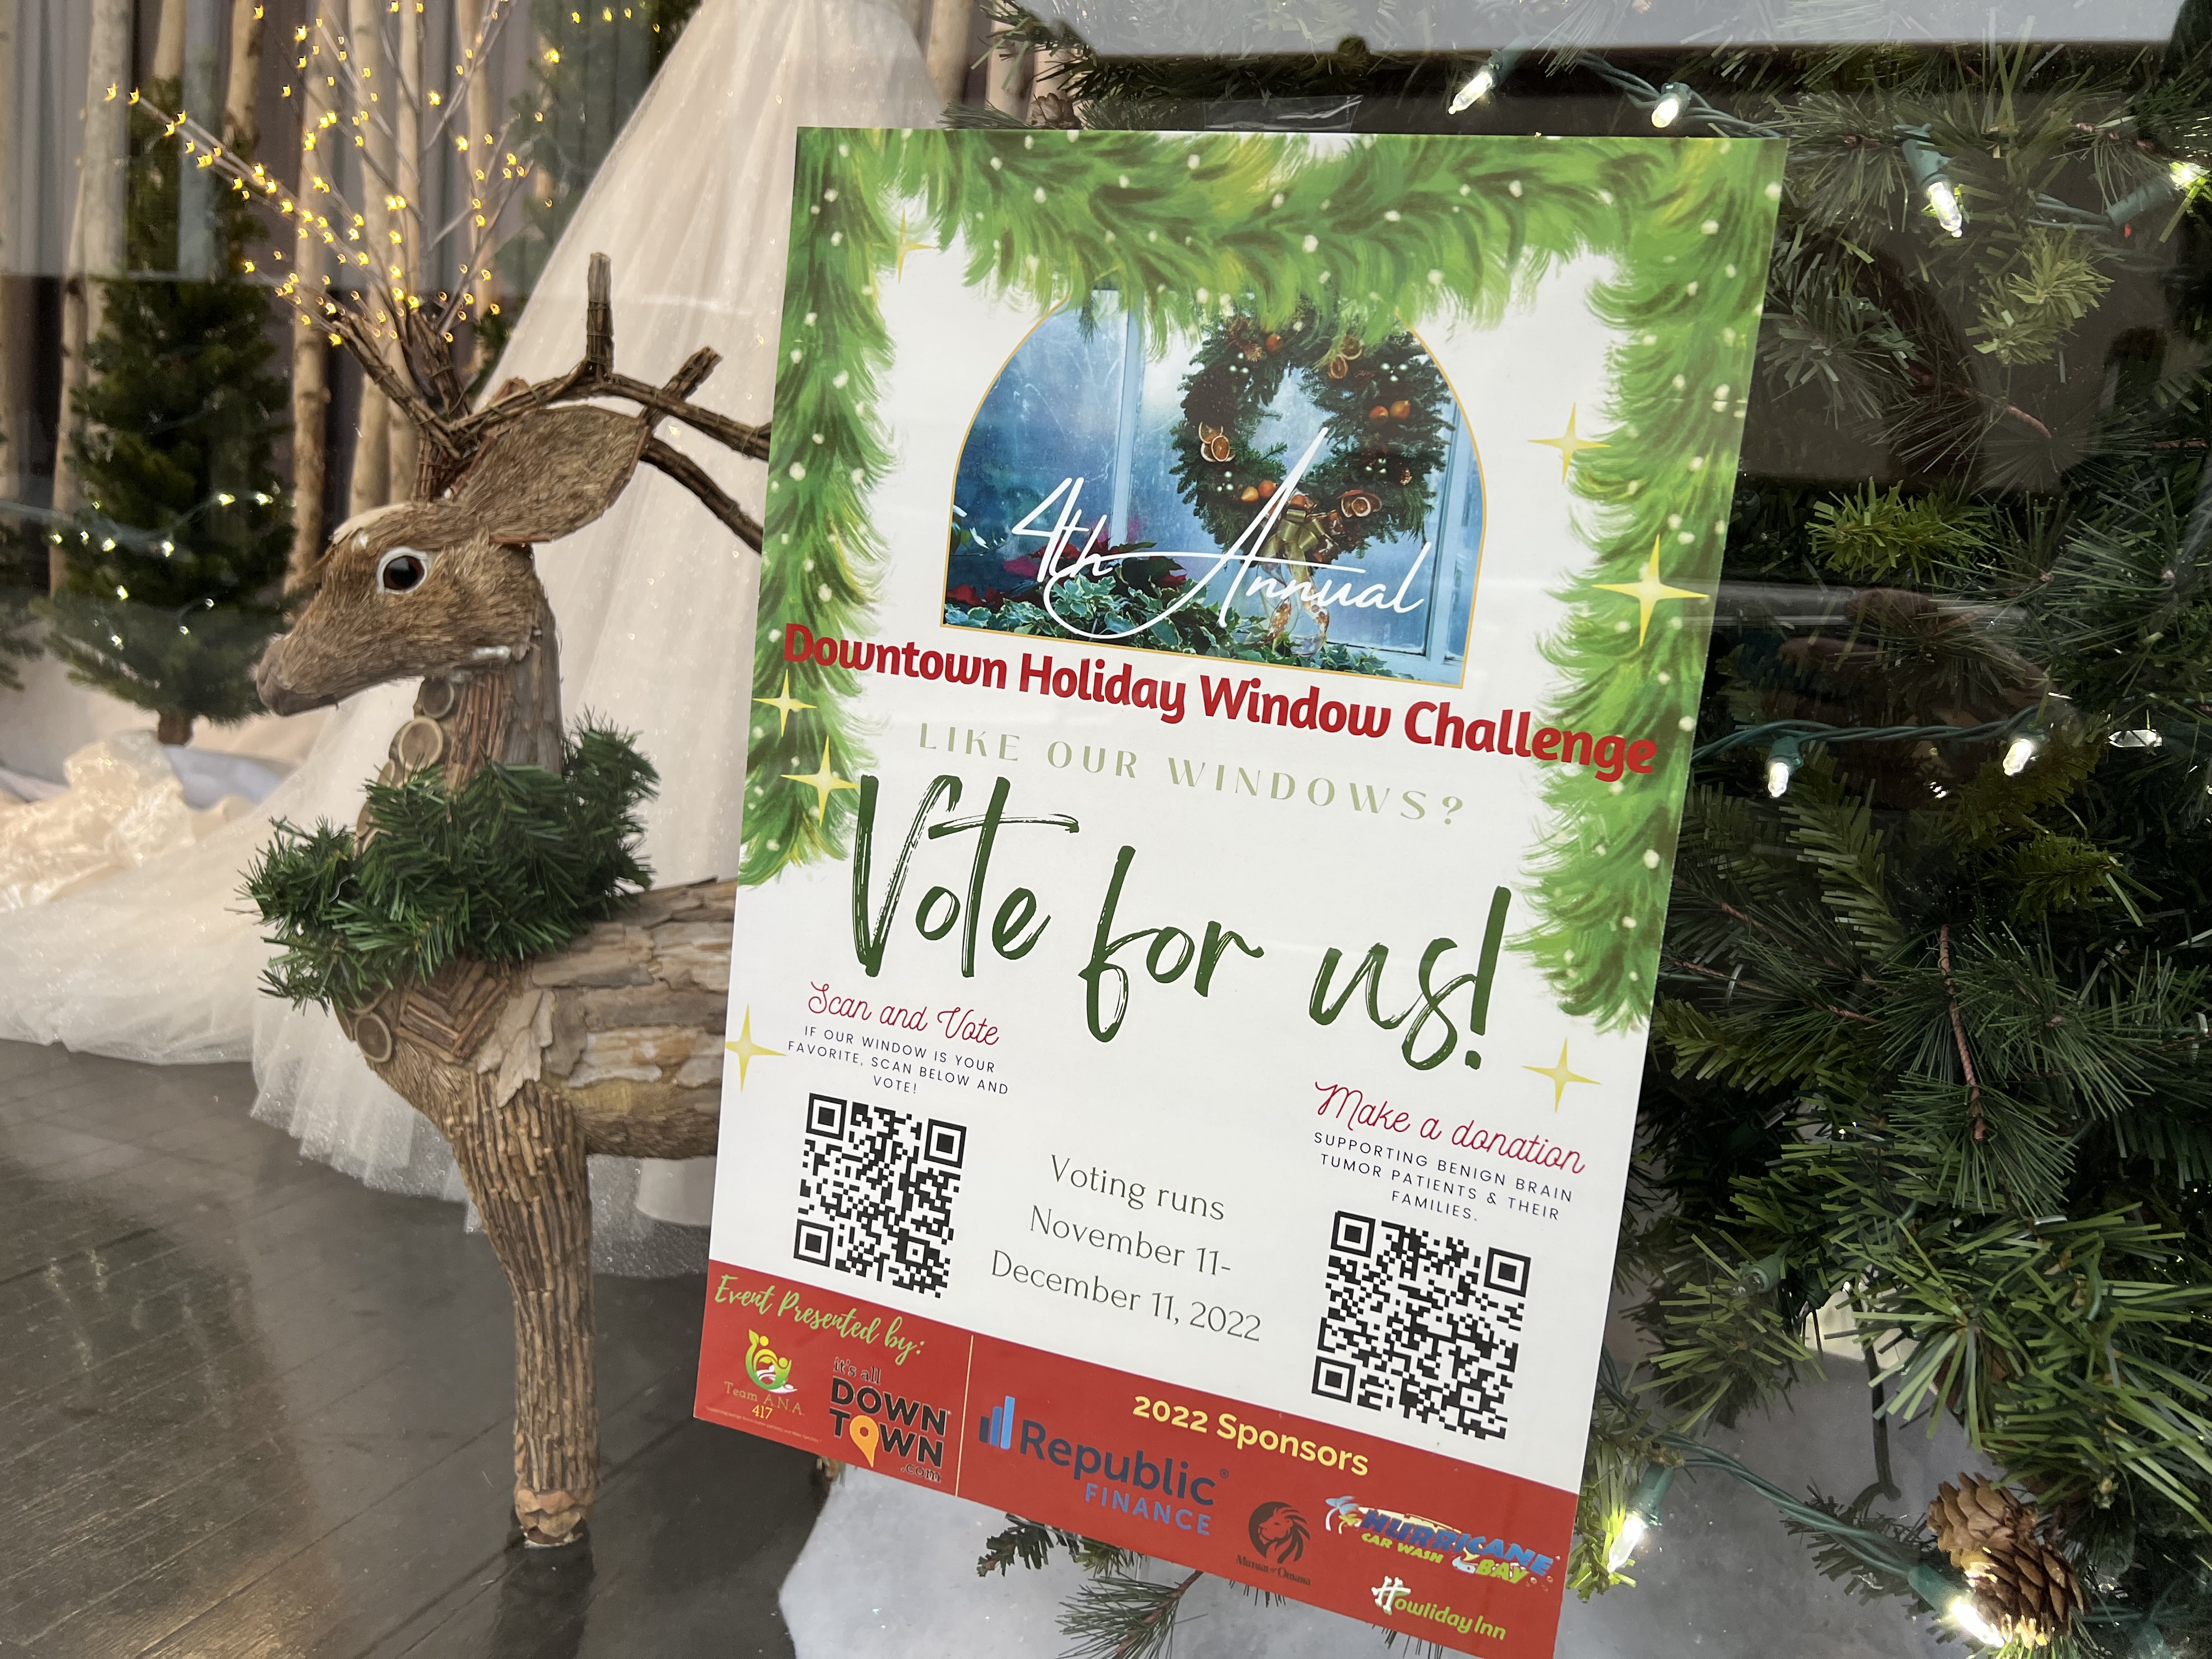 A sign in a window encourages people to vote for this display in the Downtown Holiday Window Challenge